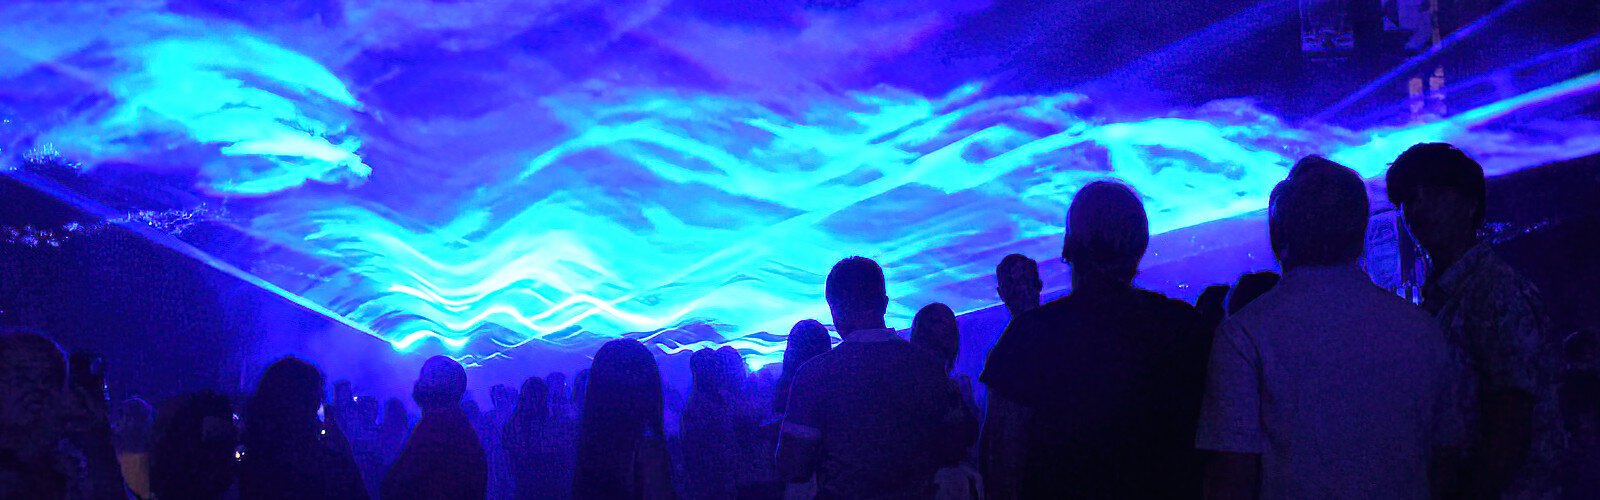 Commissioned by Water Street Tampa developer Strategic Property Partners, the WATERLICHT large-scale light installation from Netherlands-based Studio Roosegaarde transformed Water Street into an underwater oasis in late October.